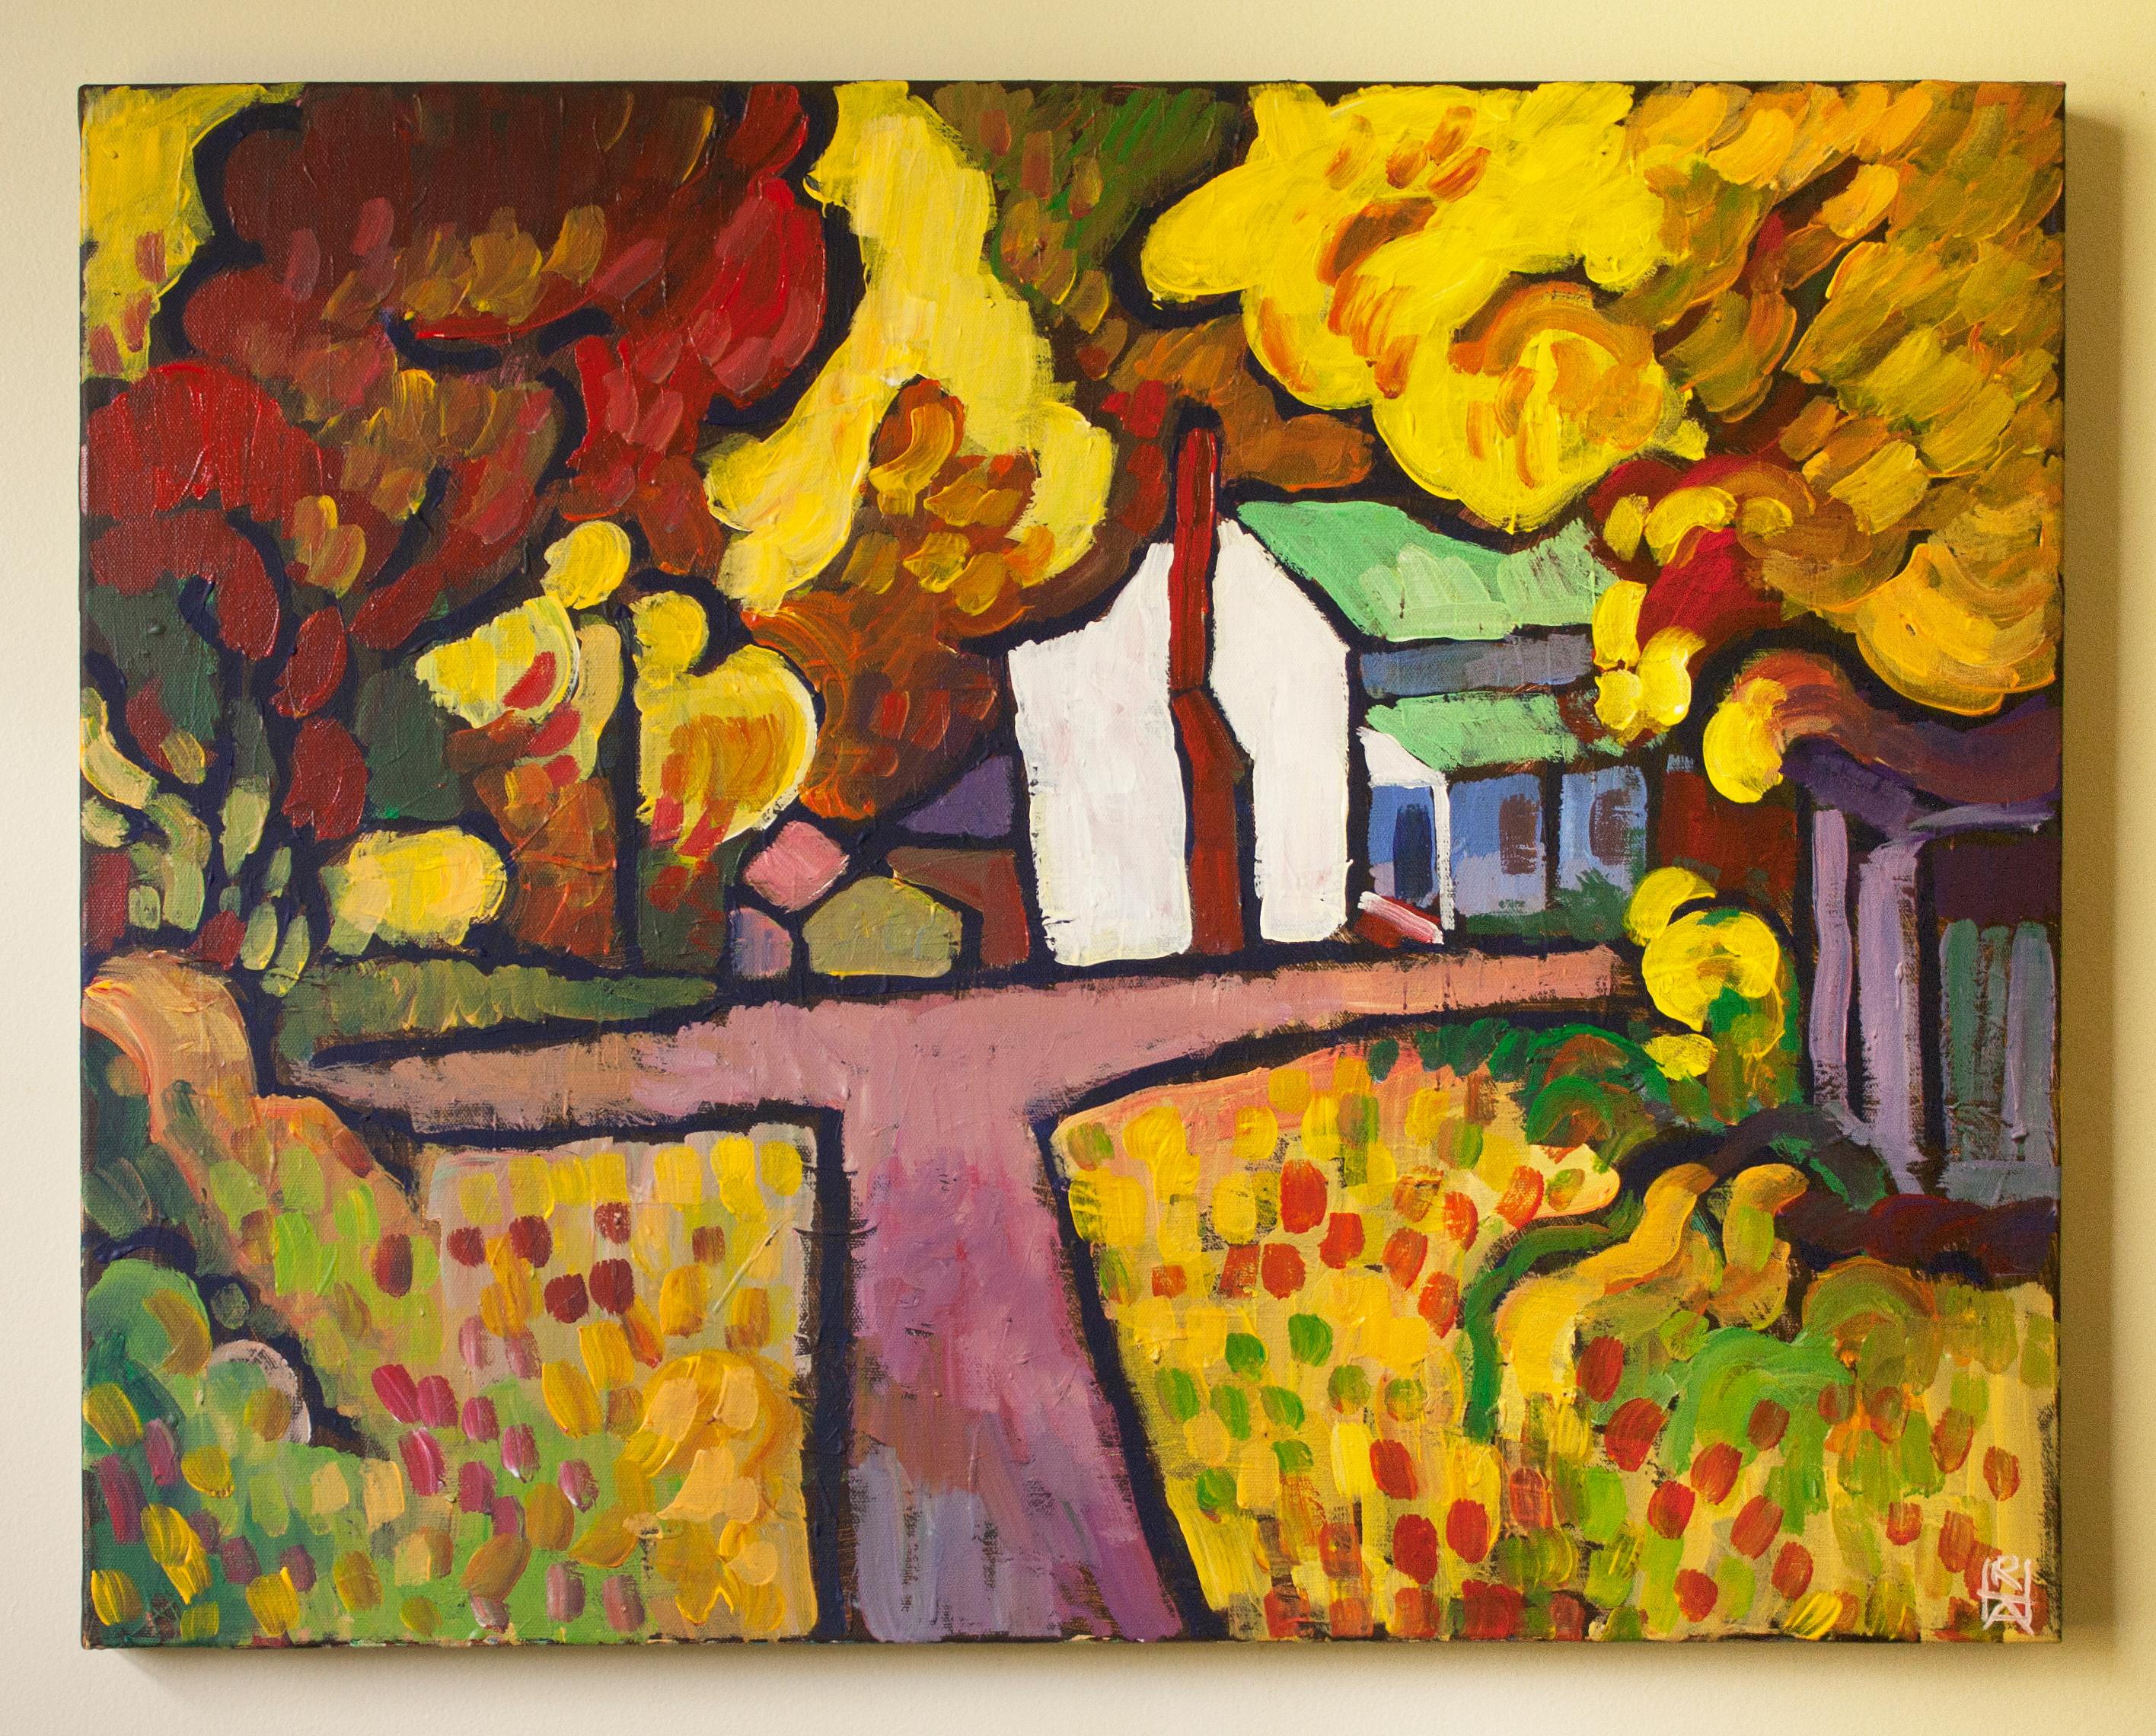 Hakes Hollow - Expressionist Painting by Robert Hofherr